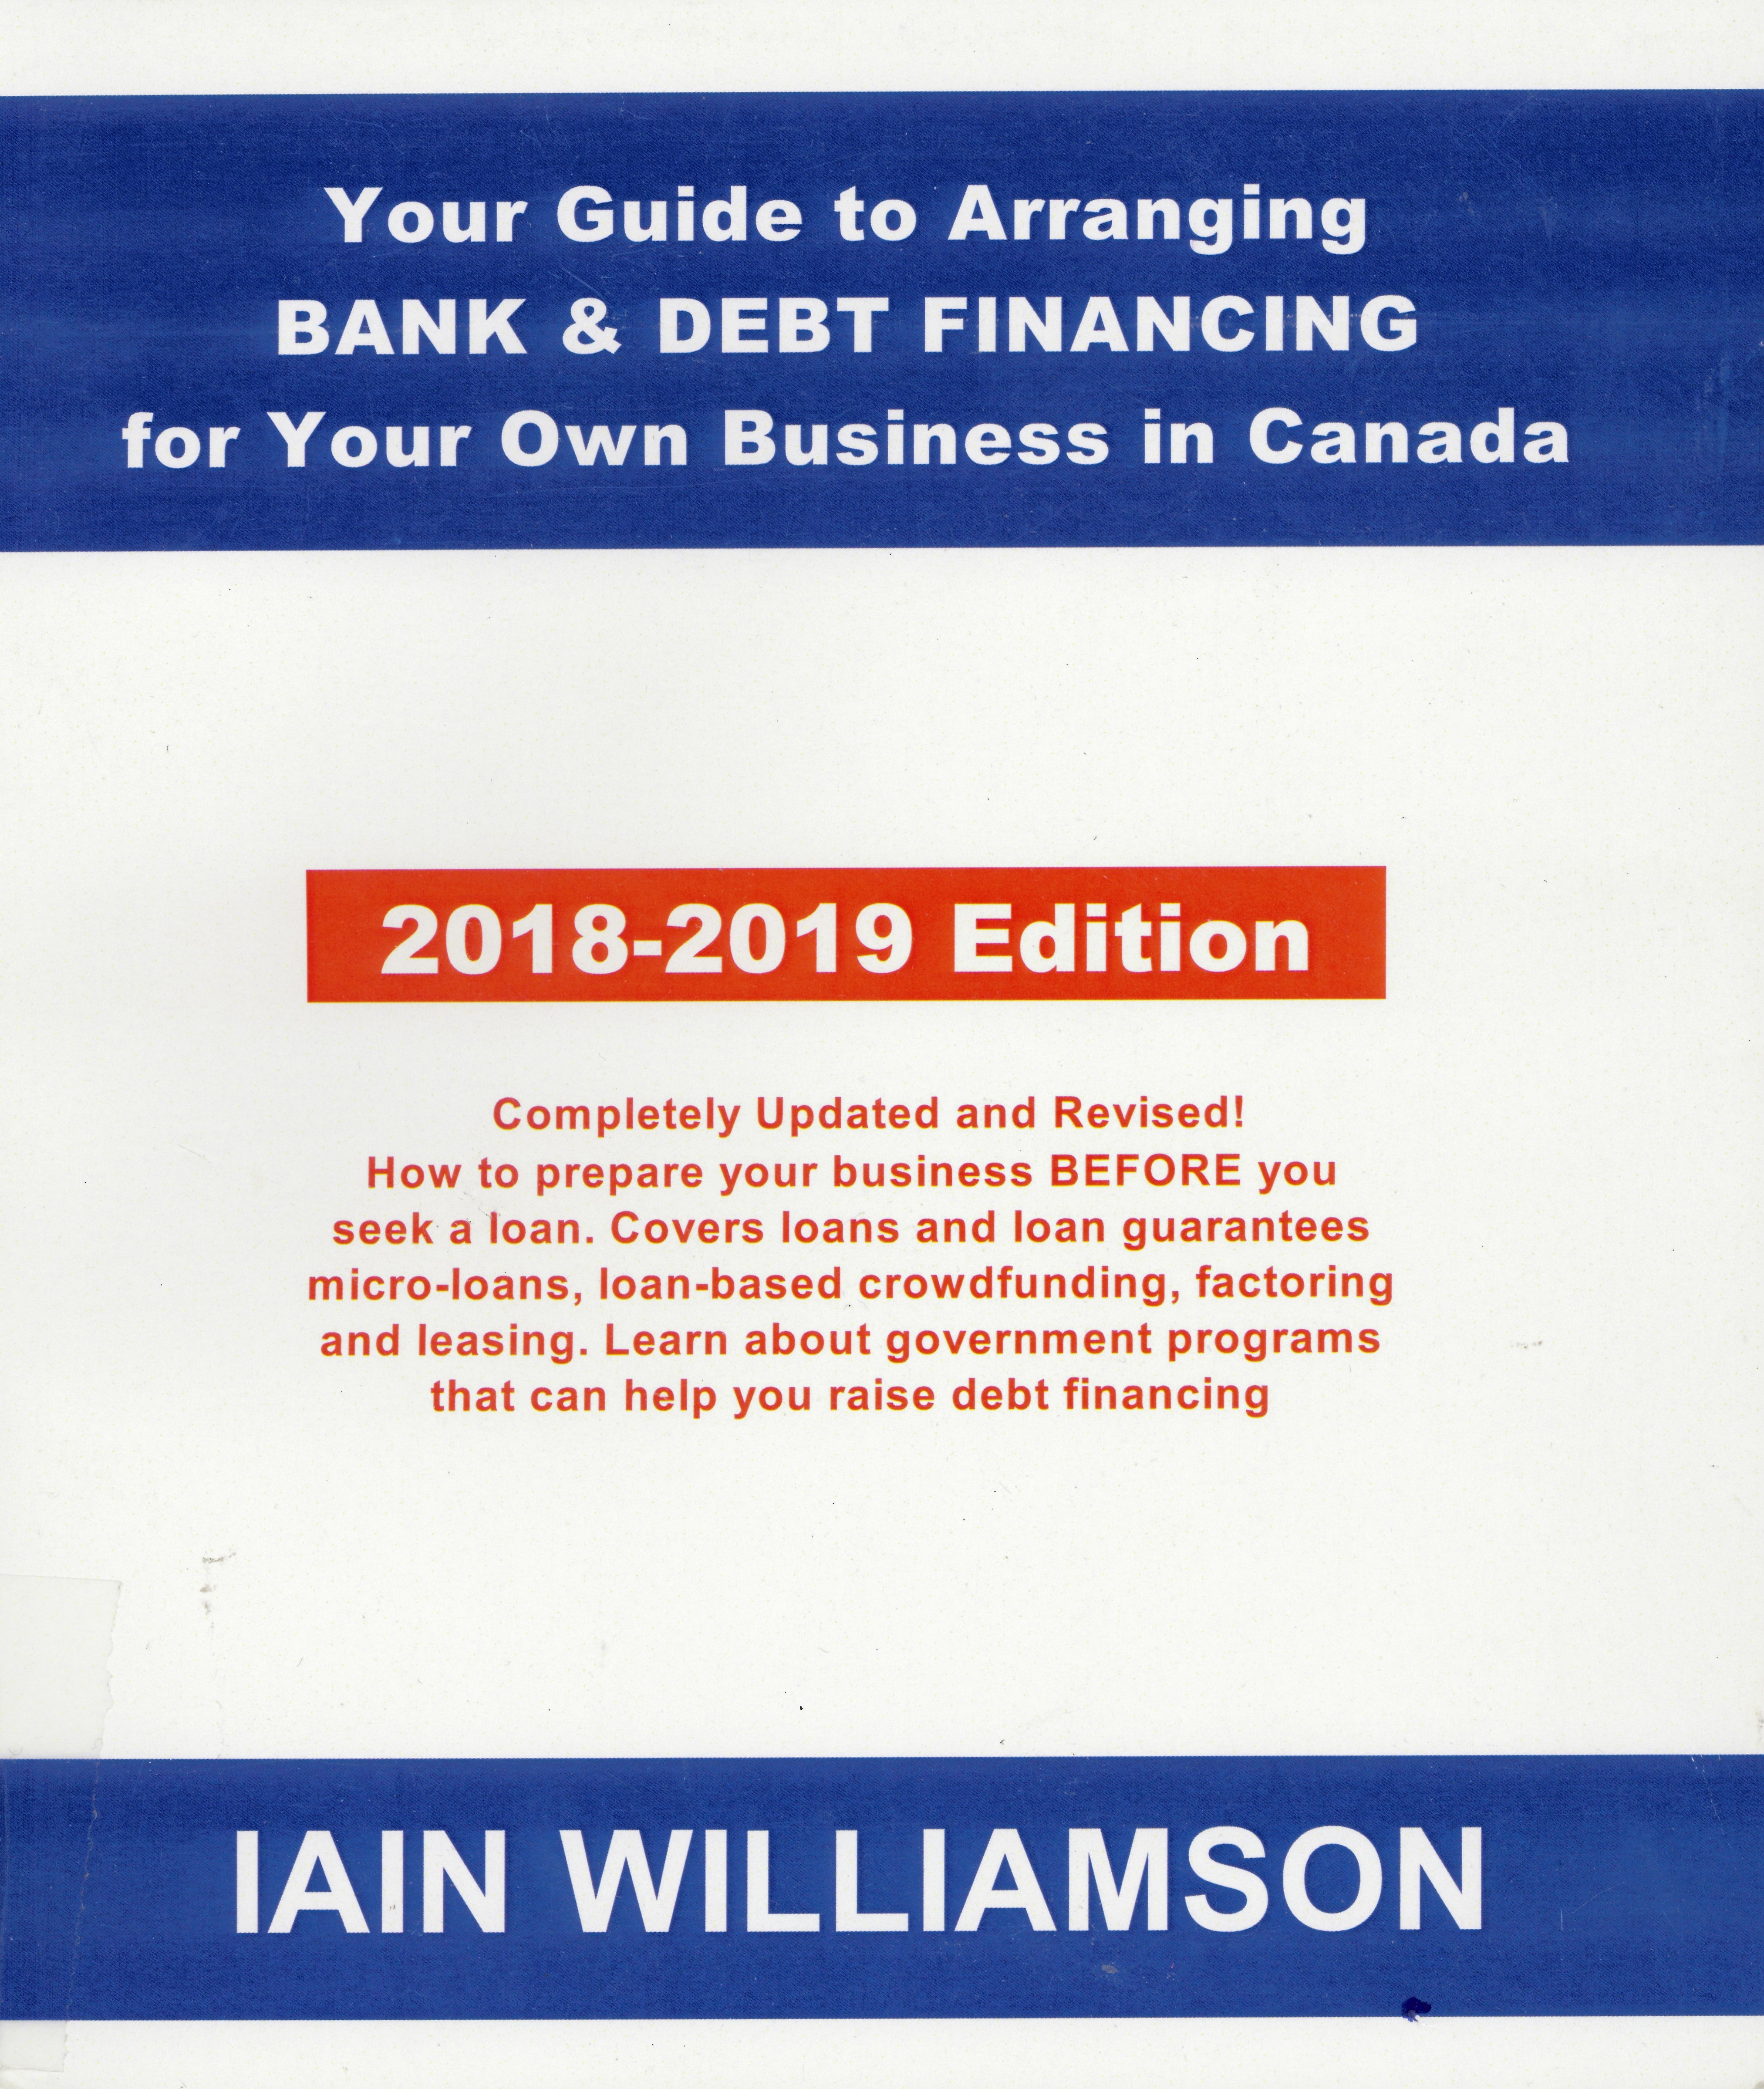 Your guide to arranging bank and debt financing for your own business in Canada